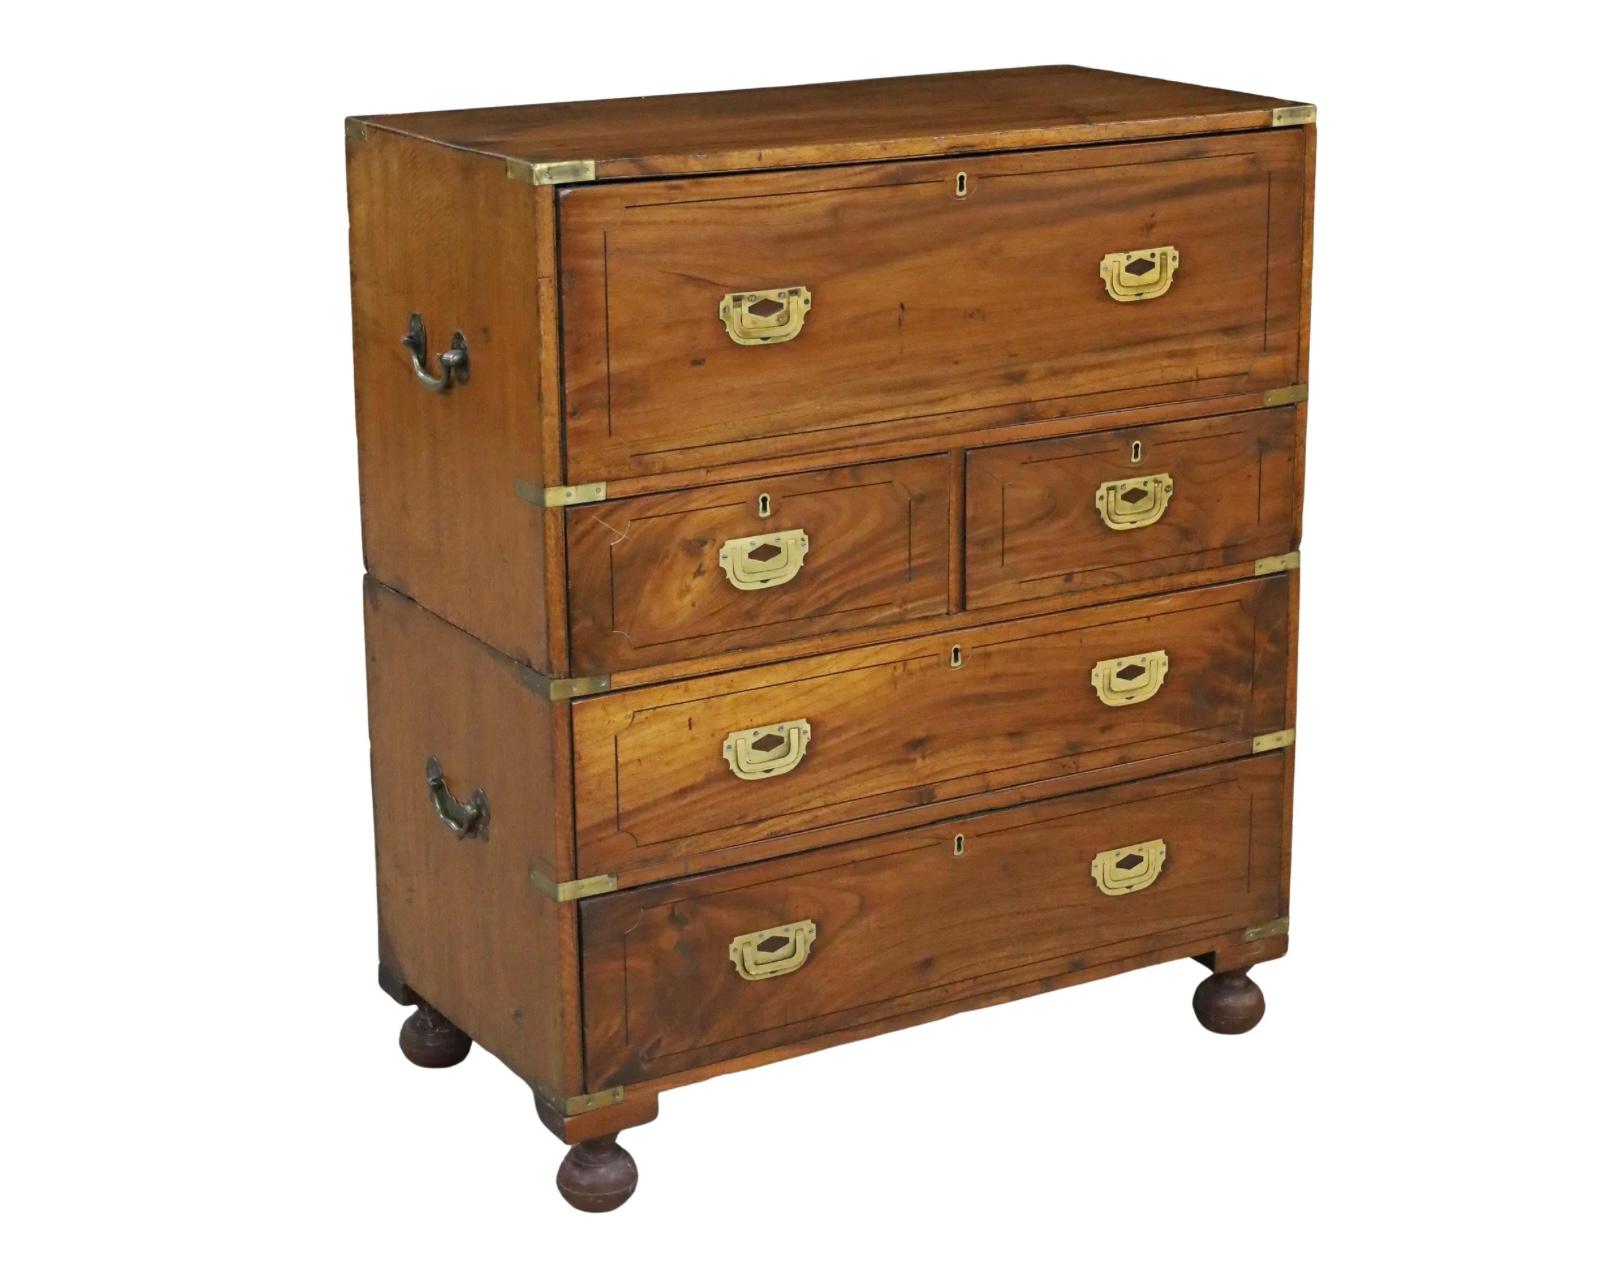 This handsome 19th century English camphor wood two-part Campaign Chest features the original solid brass corner mounts, escutcheons and hardware, including the signature lift handles commonly associated with campaign style. This chest comes in two